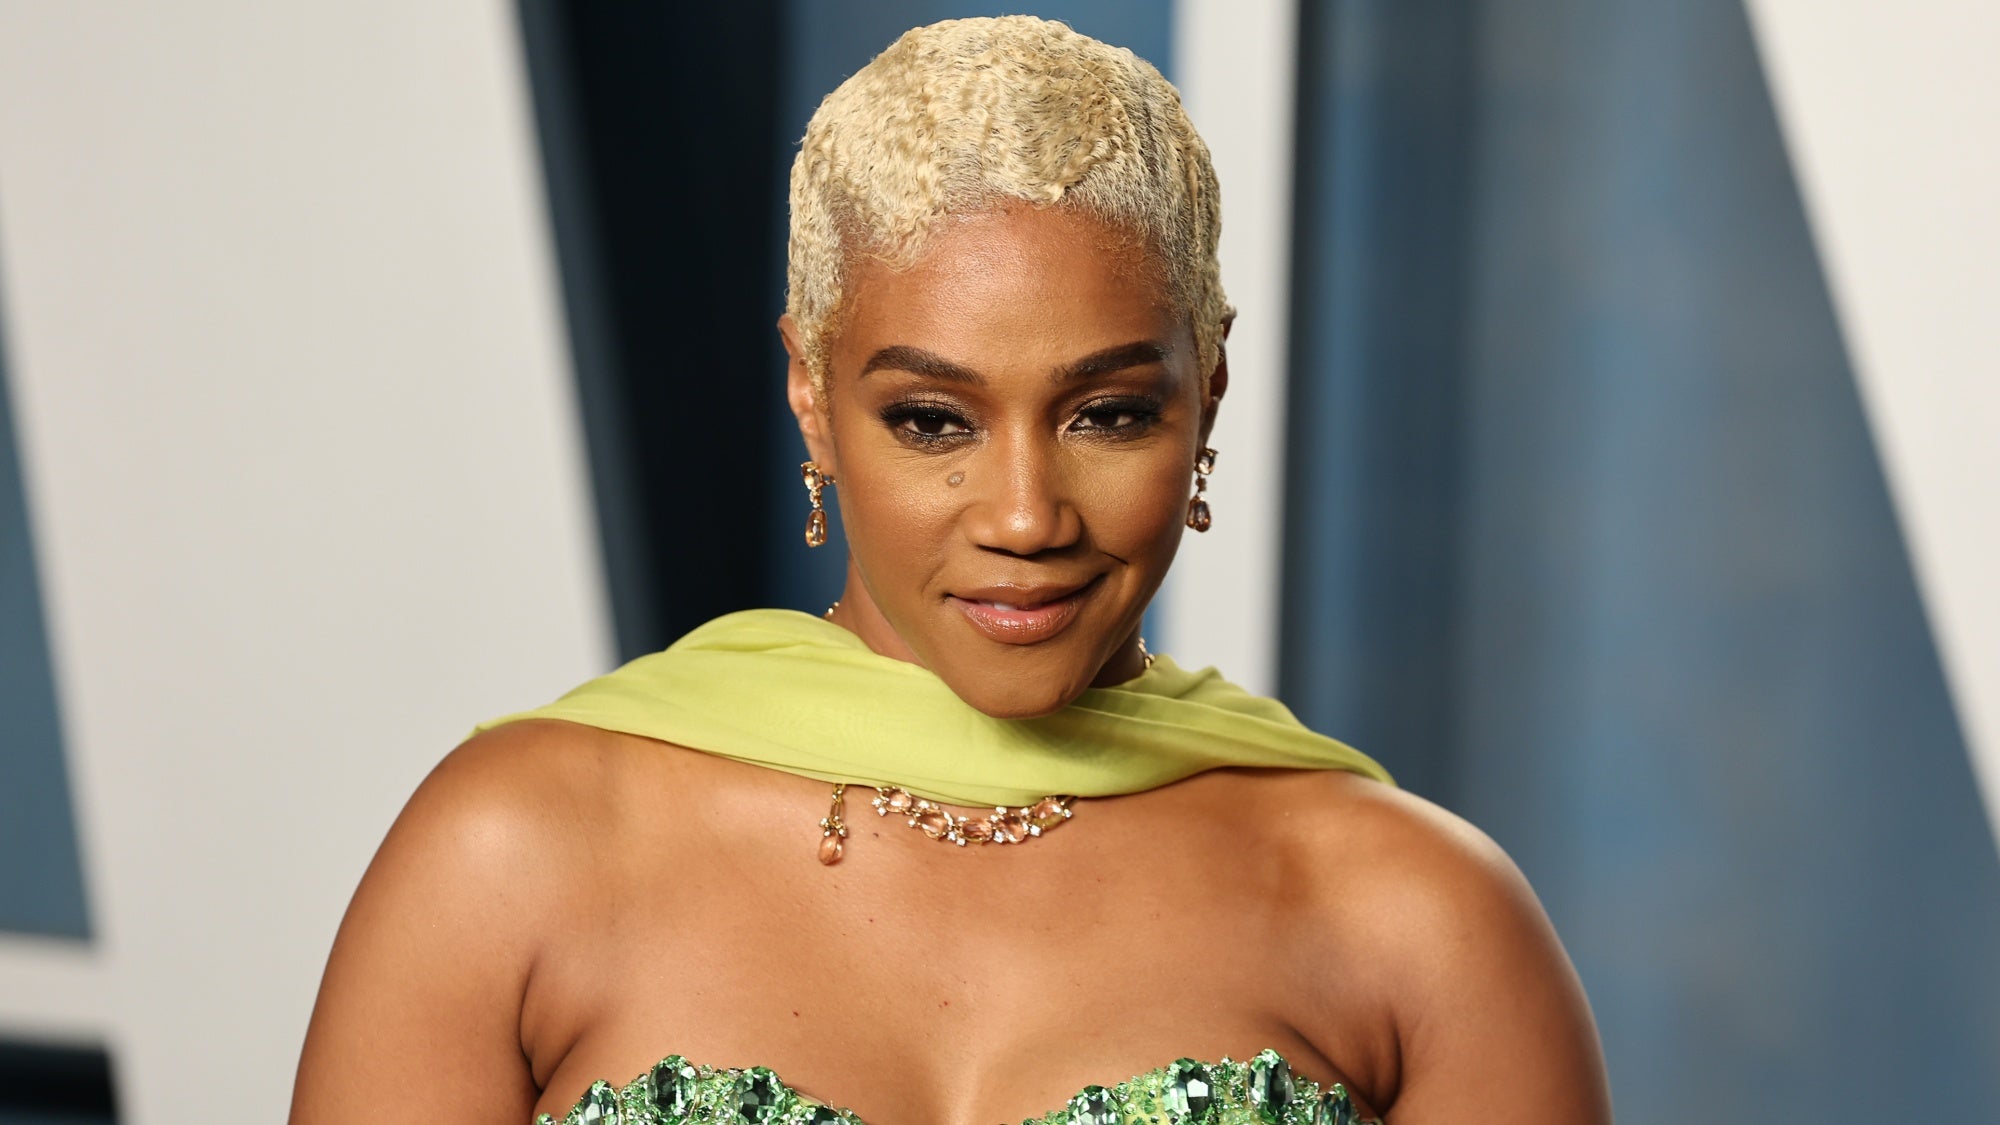 This is Not A Costume: Tiffany Haddish Checks Reporter About Her Evening Gown